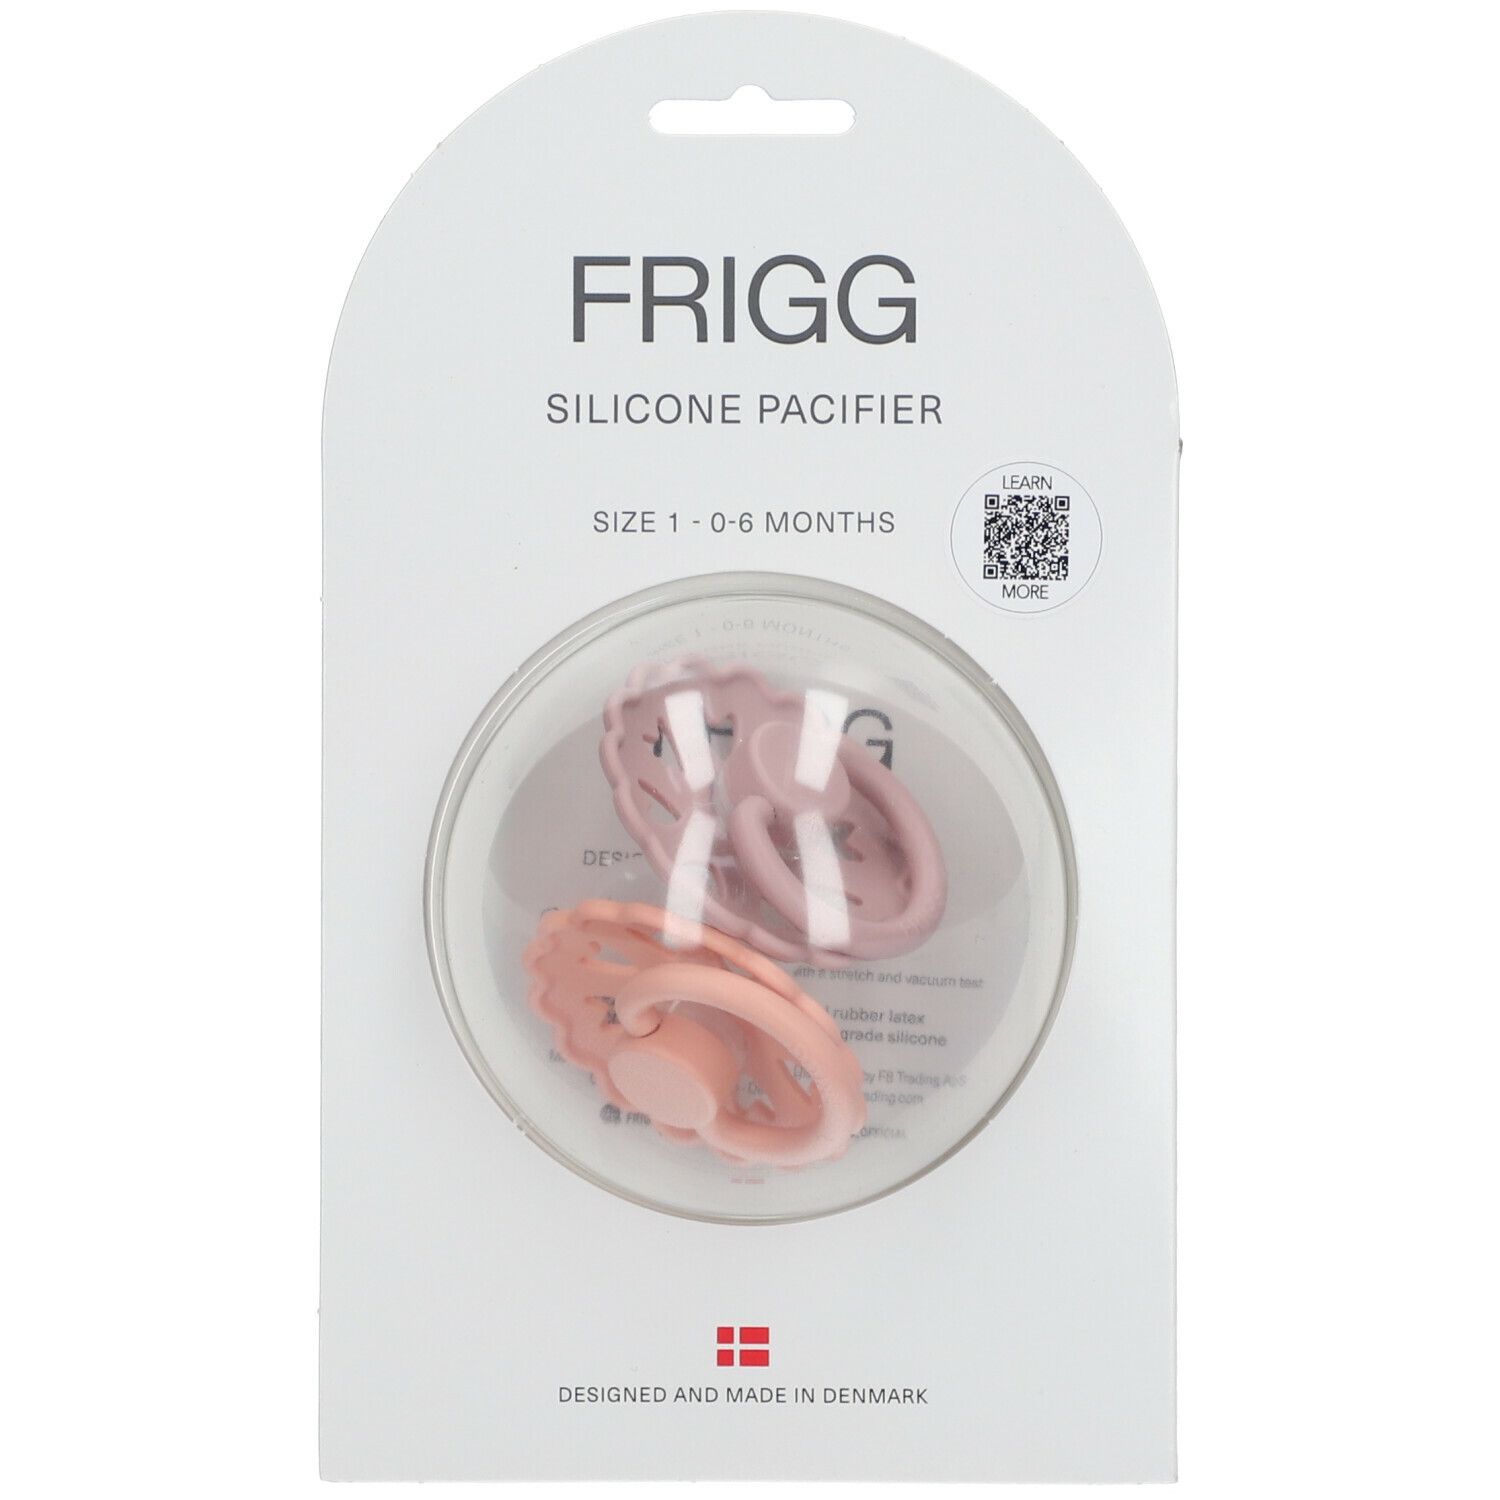 FRIGG Tétine en silicone Fairy Taille 1 0-6 mois 2 pc(s) 